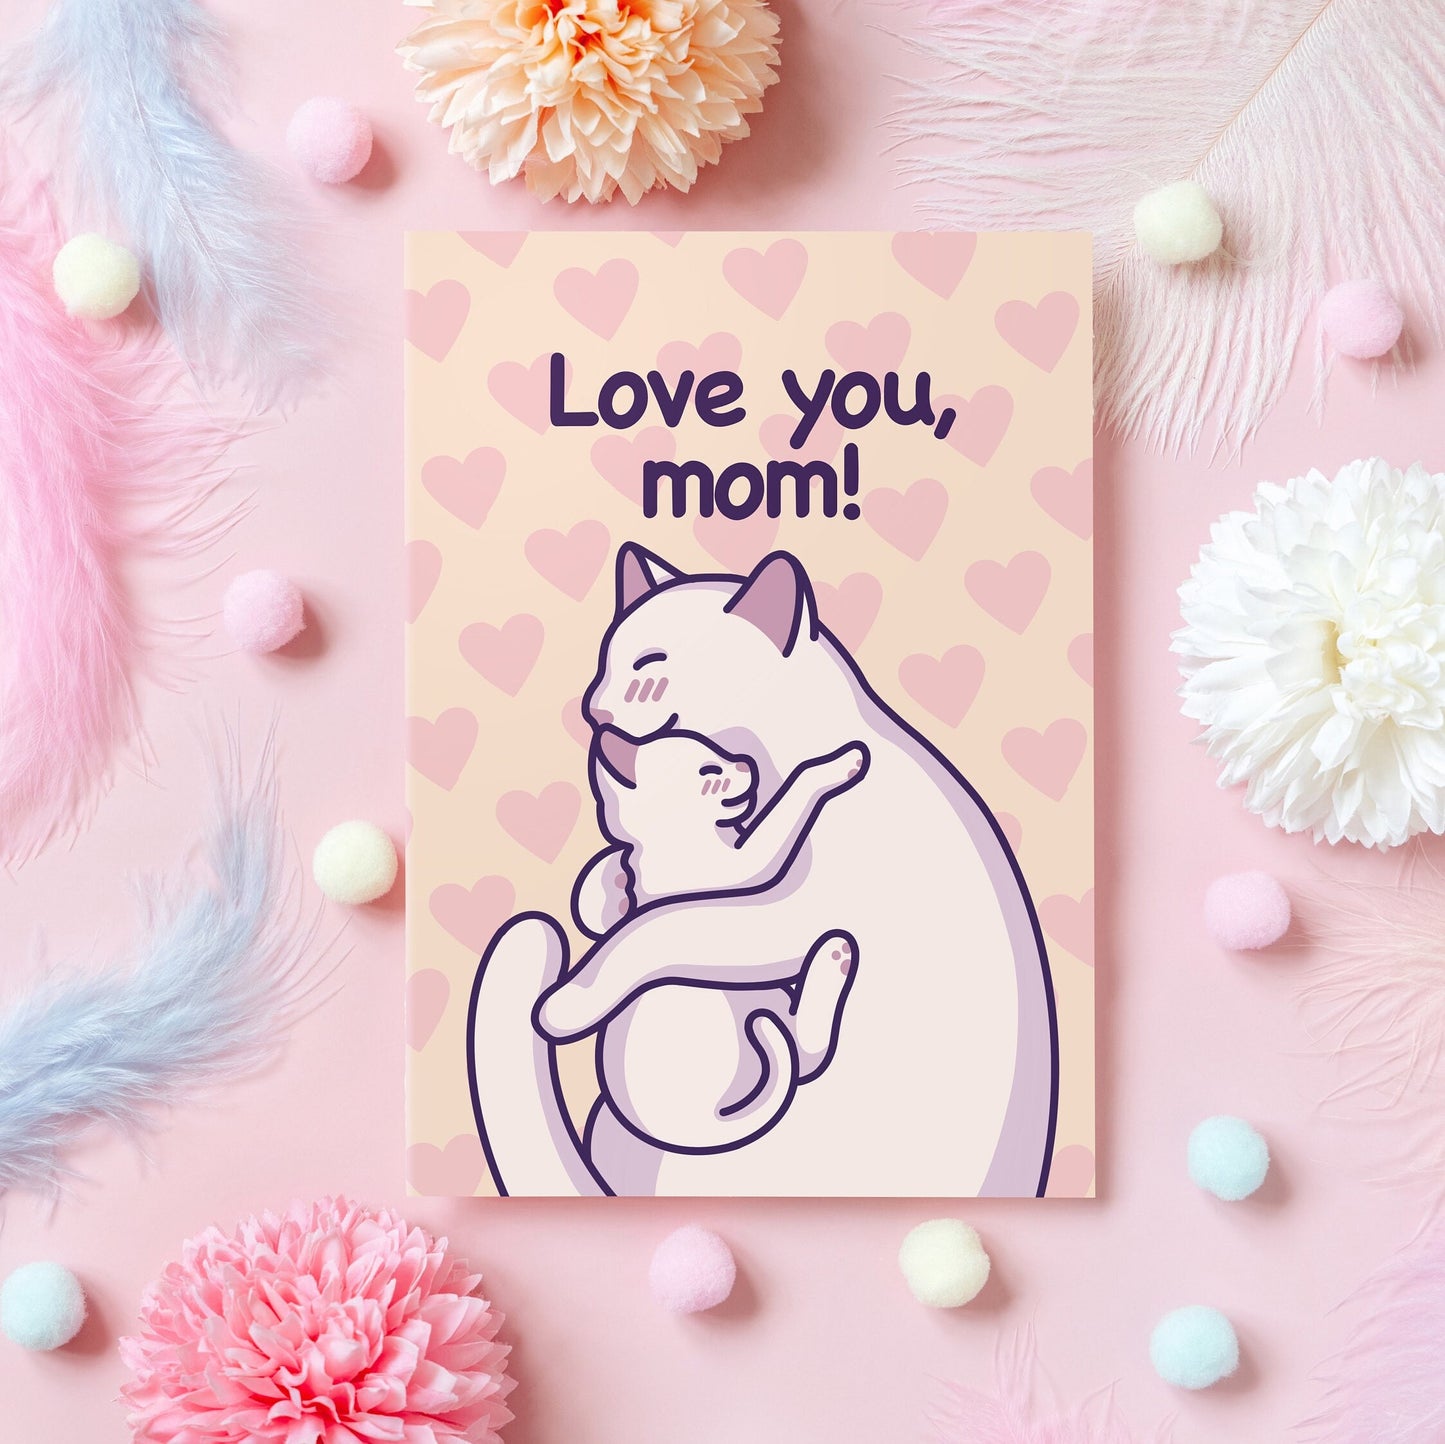 Cute Cat Card for Mom | Love You, Mom! | Wholesome Cat & Kitten Snuggle